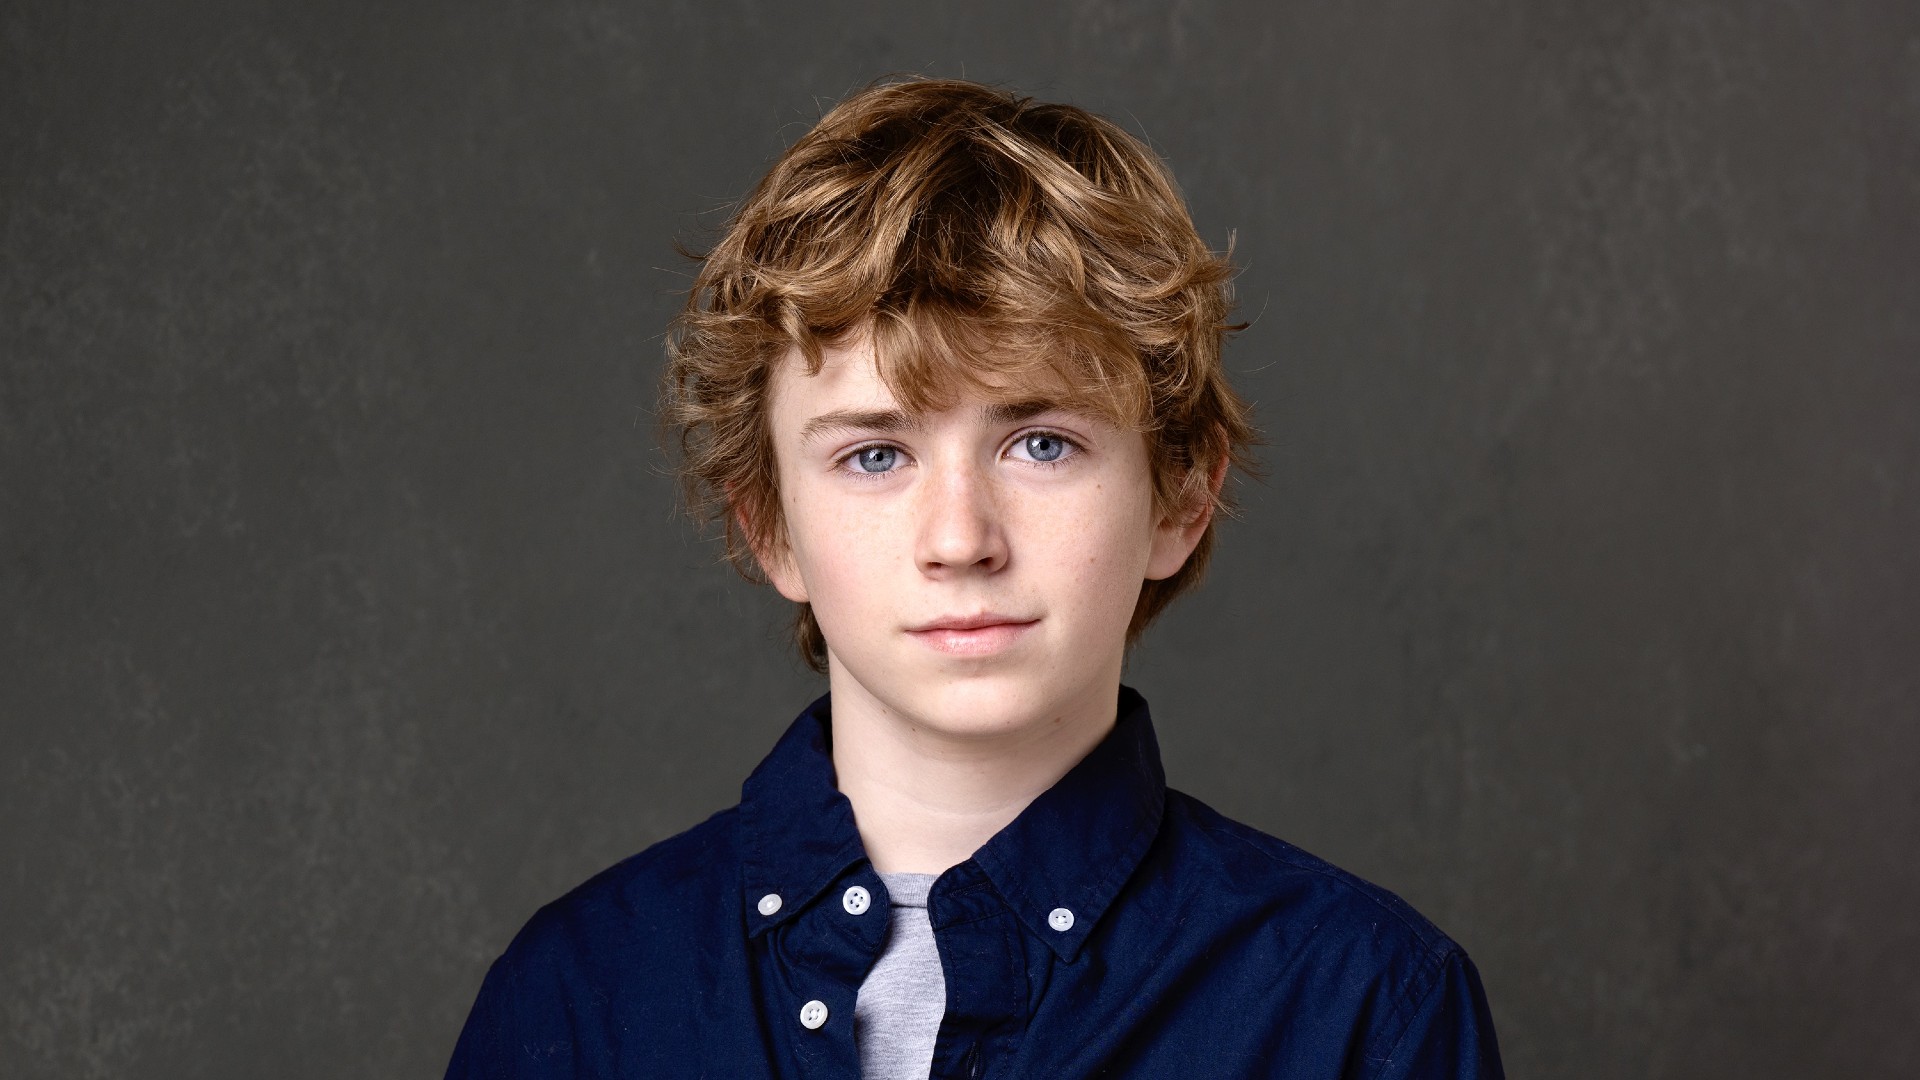 A professional headshot of young actor Walker Scobell. He has short, curly blond hair, slightly pale skin, and blue eyes. He is wearing a dark blue shirt with a light gray t-shirt undearneath.